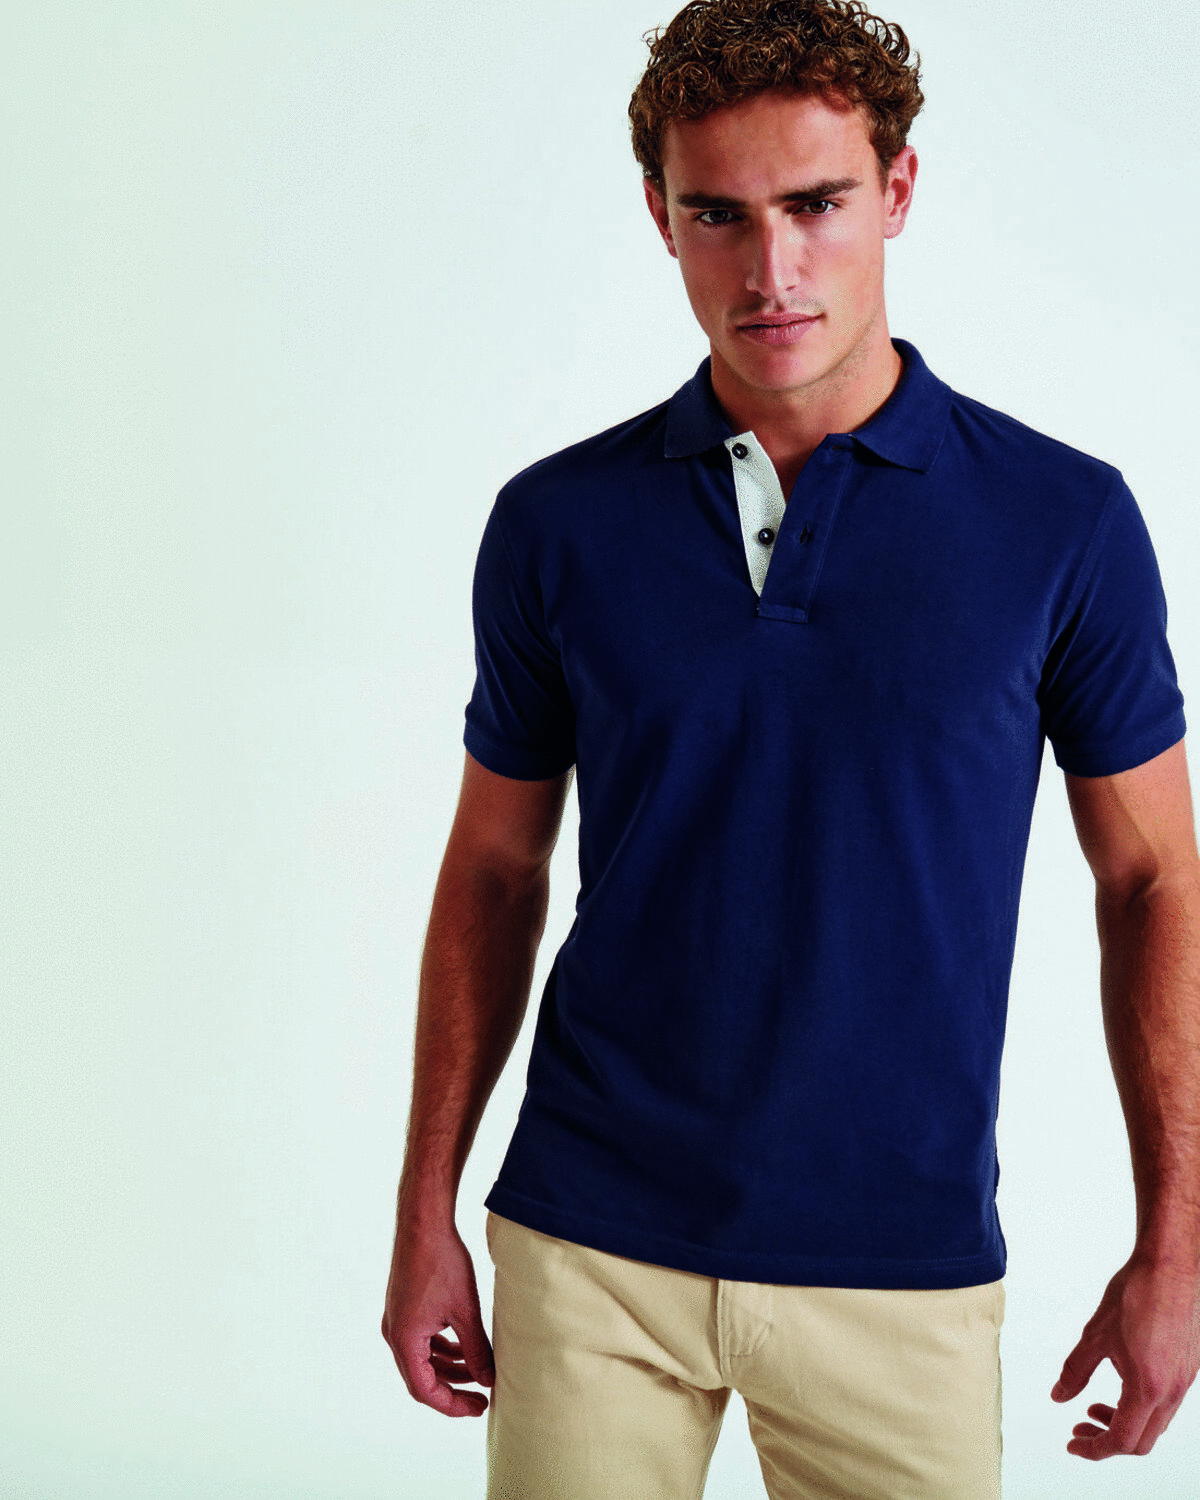 MENS CLASSIC FIT CONTRAST POLO SHIRT